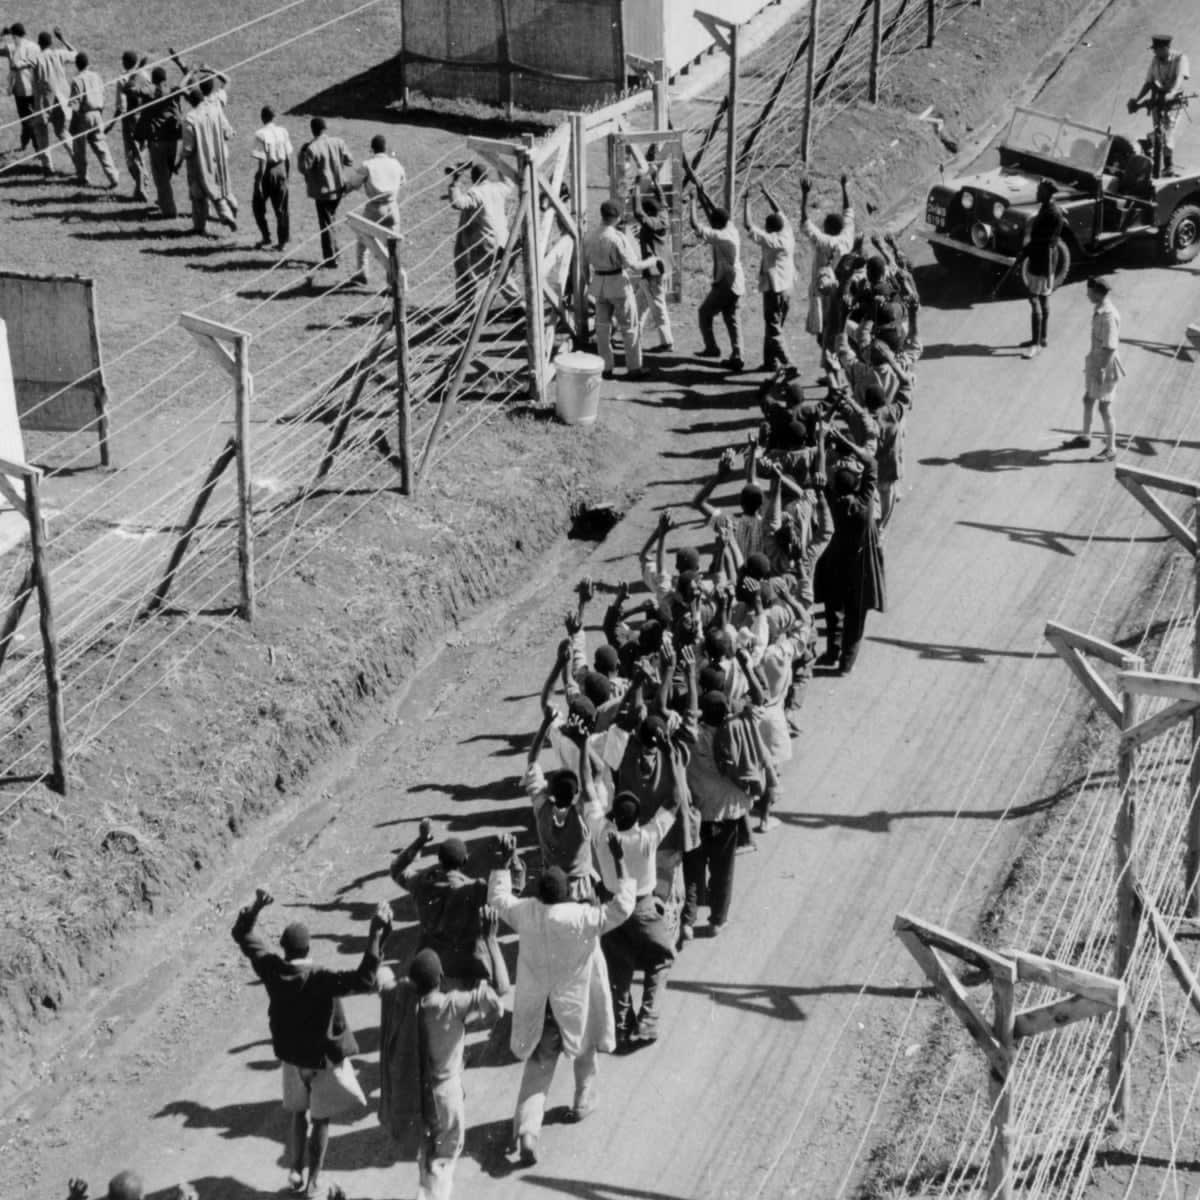 OtD 24 Apr 1954 British colonial authorities began Operation Anvil in Nairobi, Kenya. They ethnically cleansed nearly the entire Kikuyu population from the city, sending 20 to detention camps for torture and interrogation and 30k to "reserves"